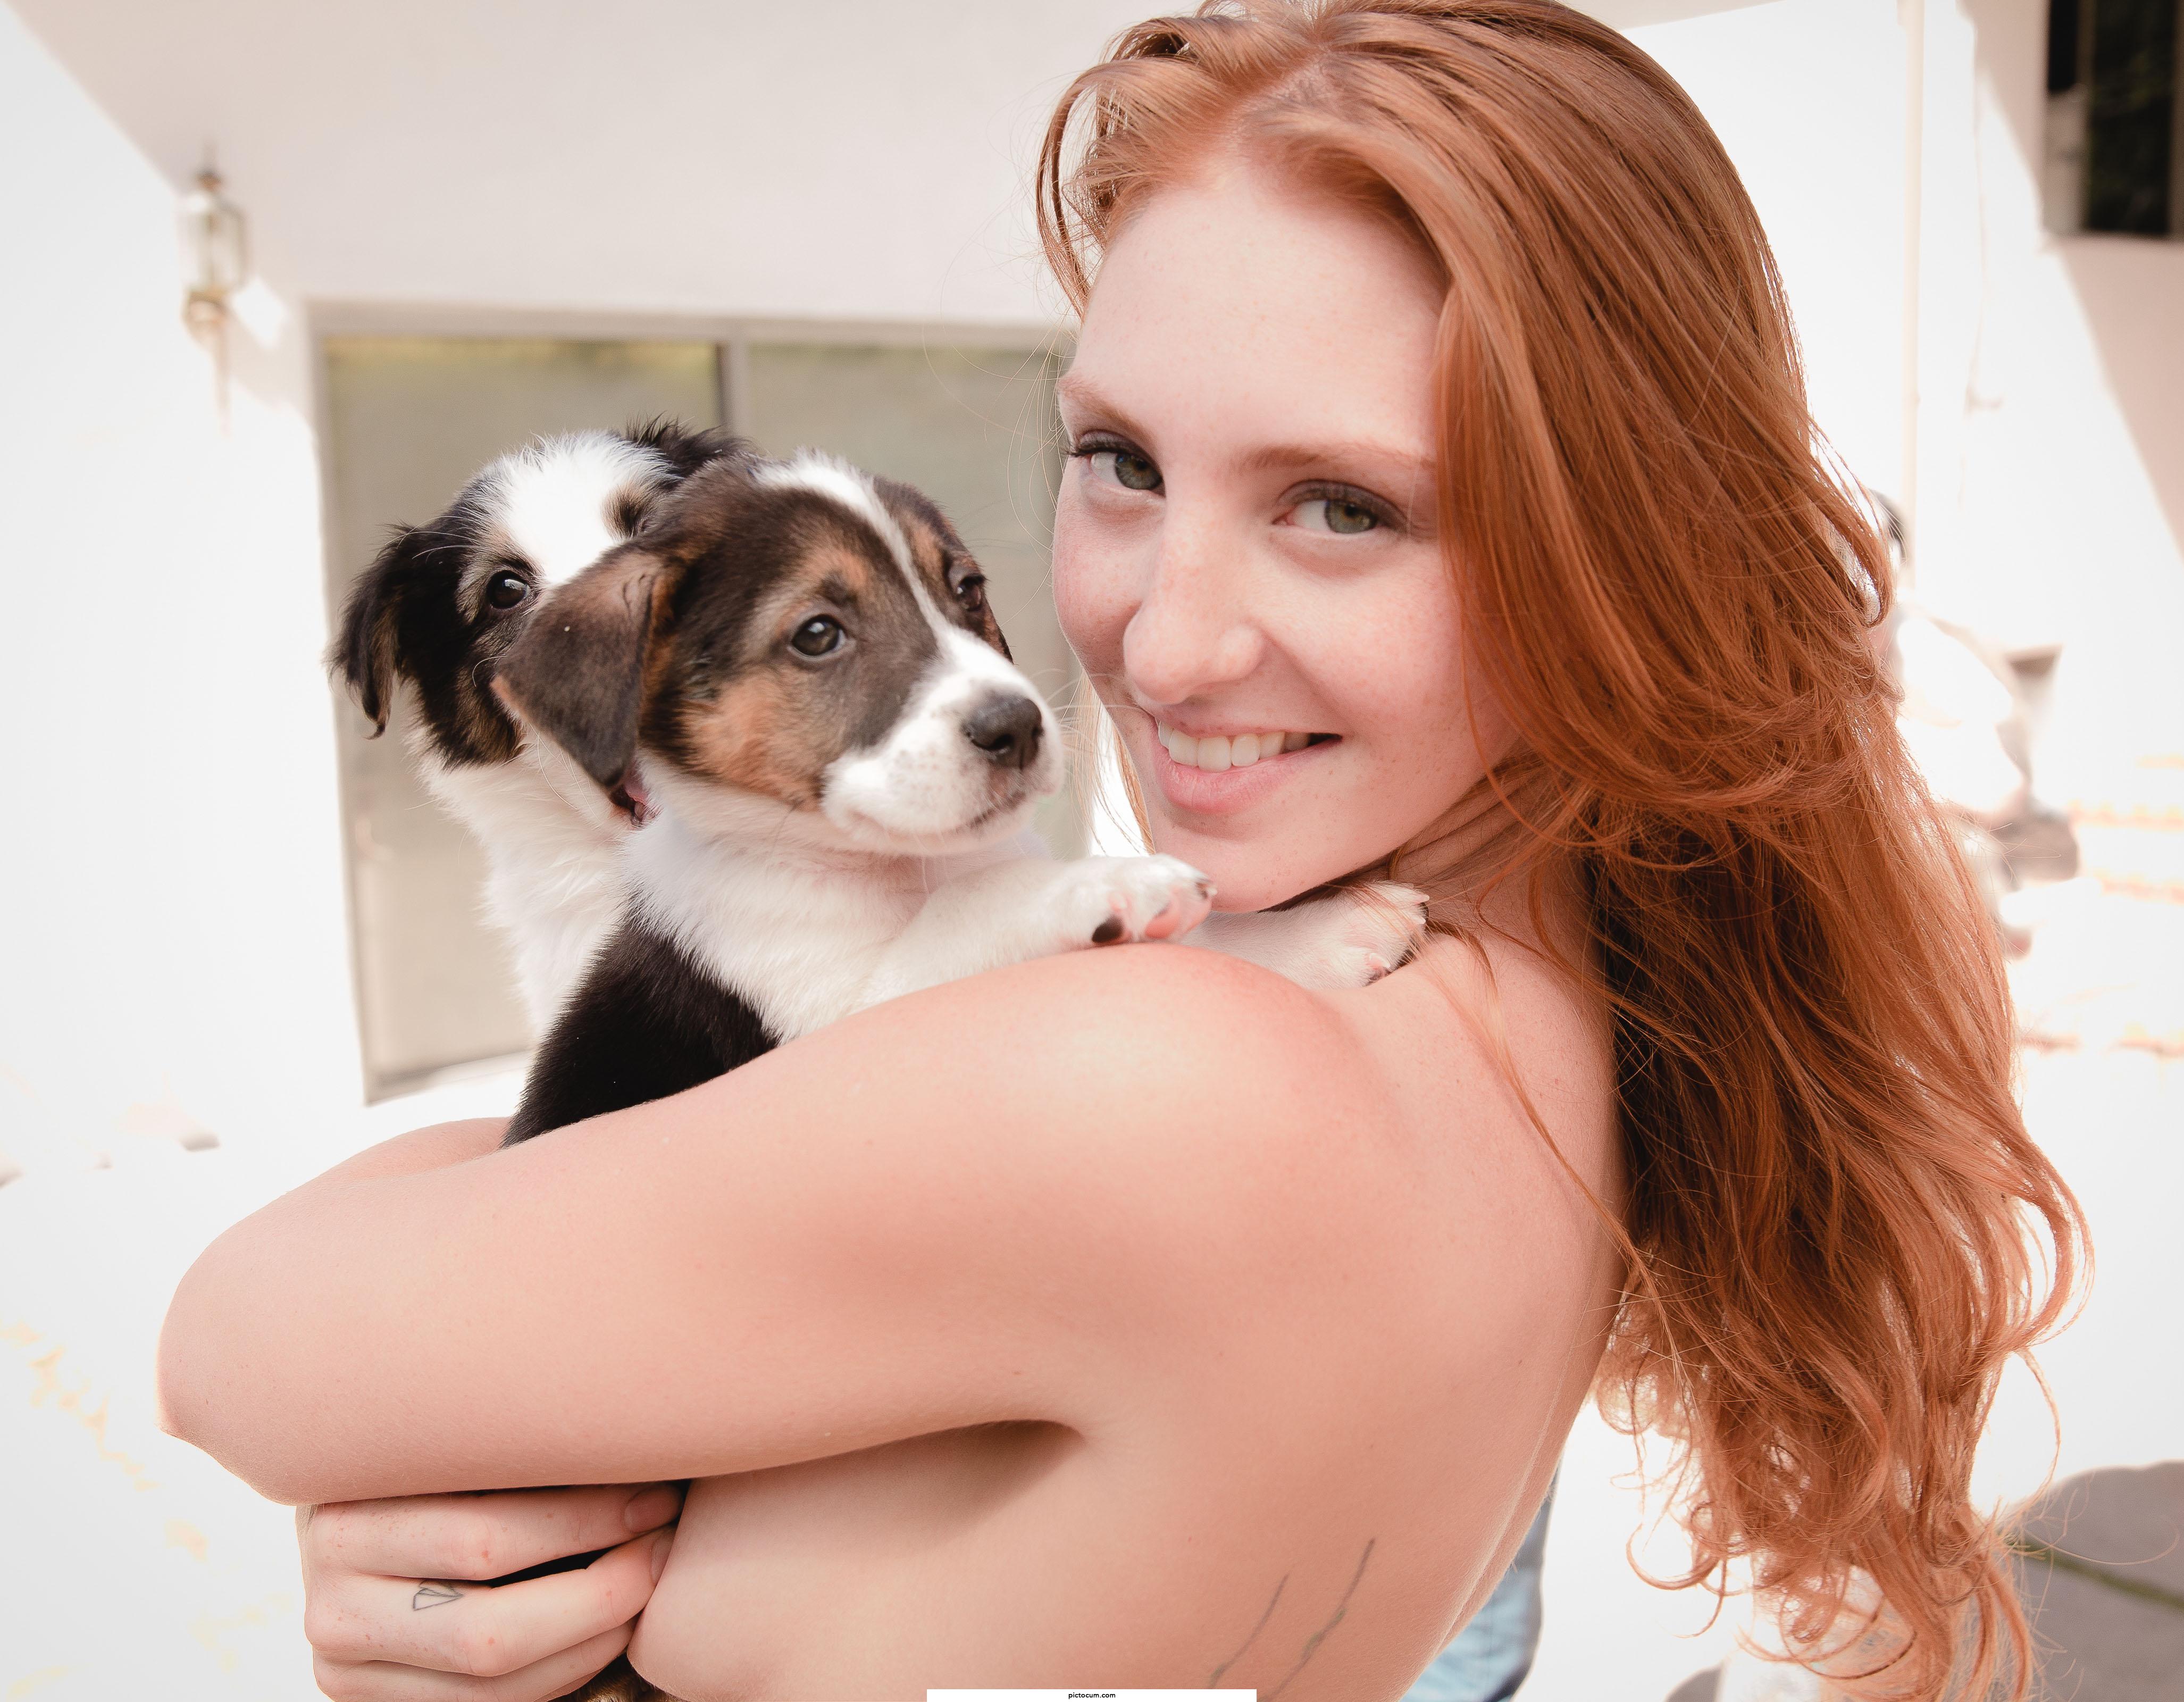 Freckled redhead holding puppies